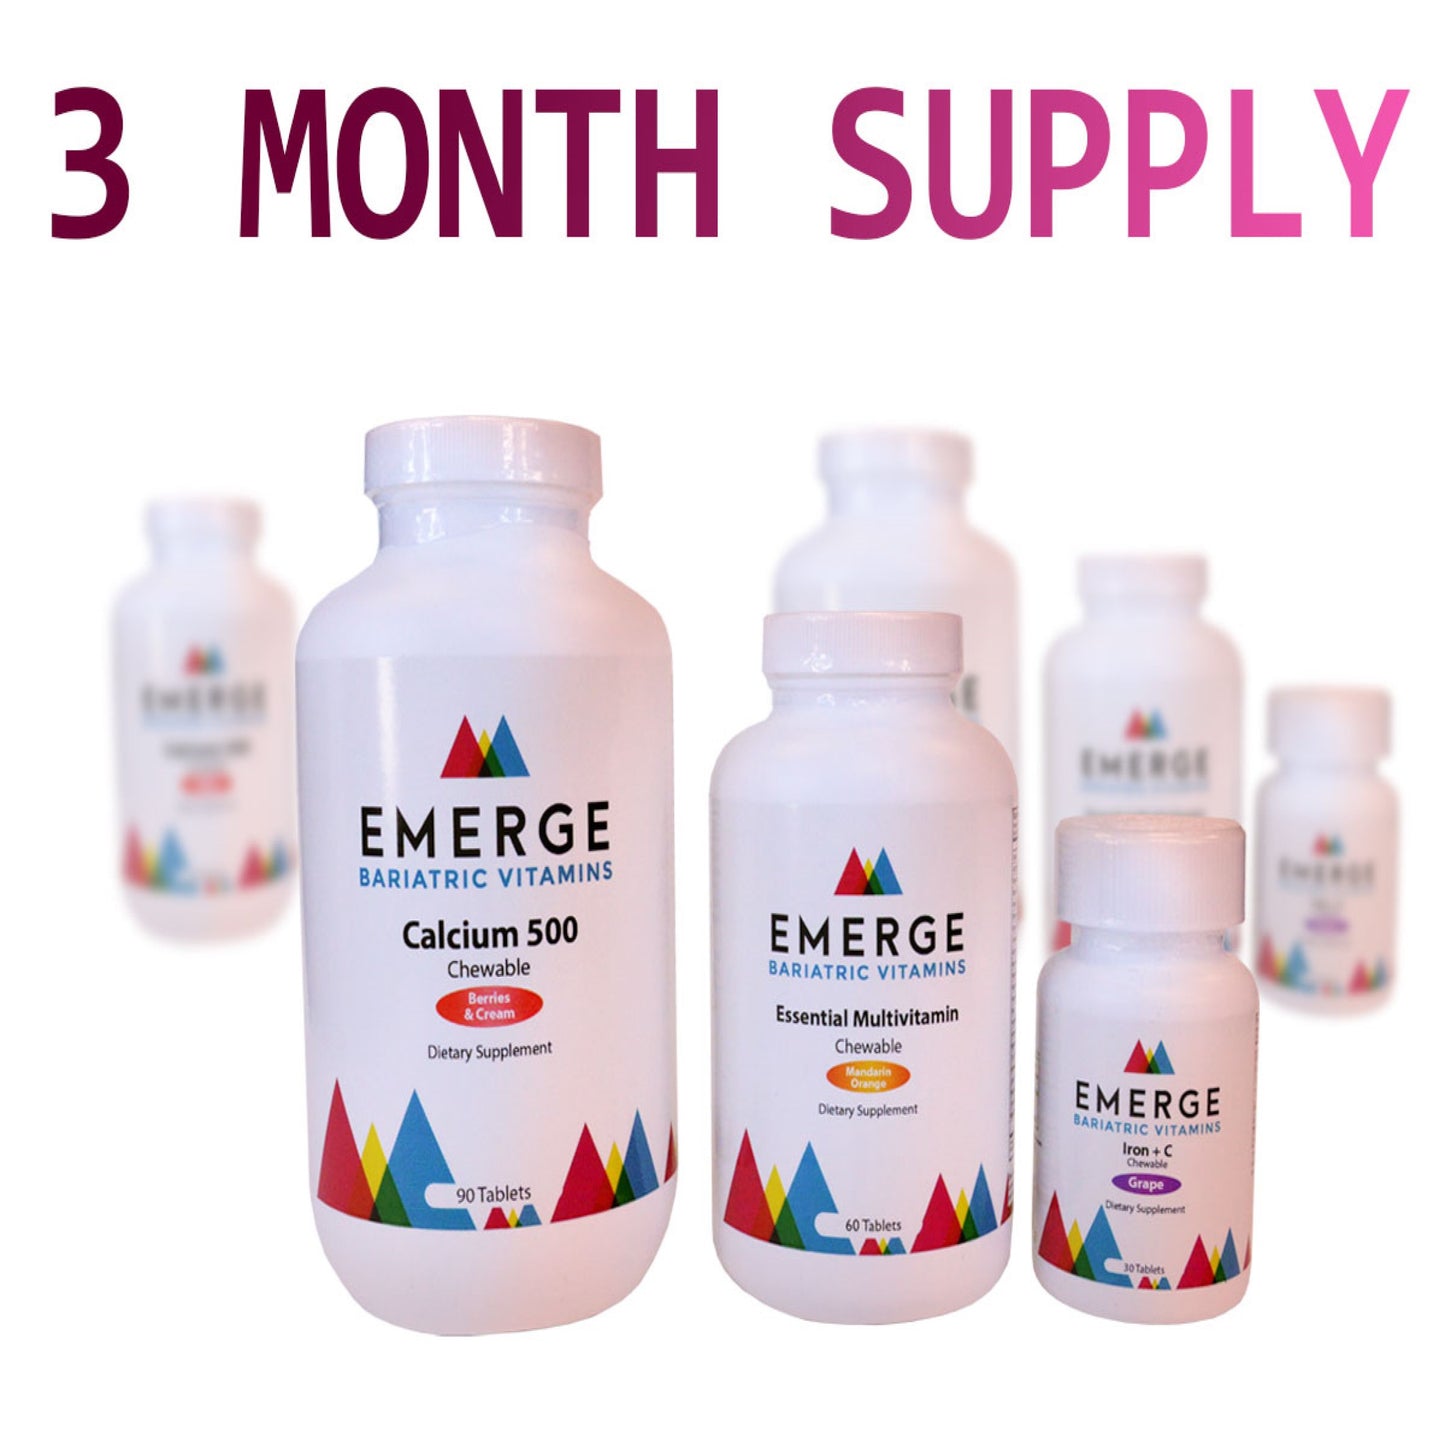 3 Month Supply - Chewable Bariatric Vitamins